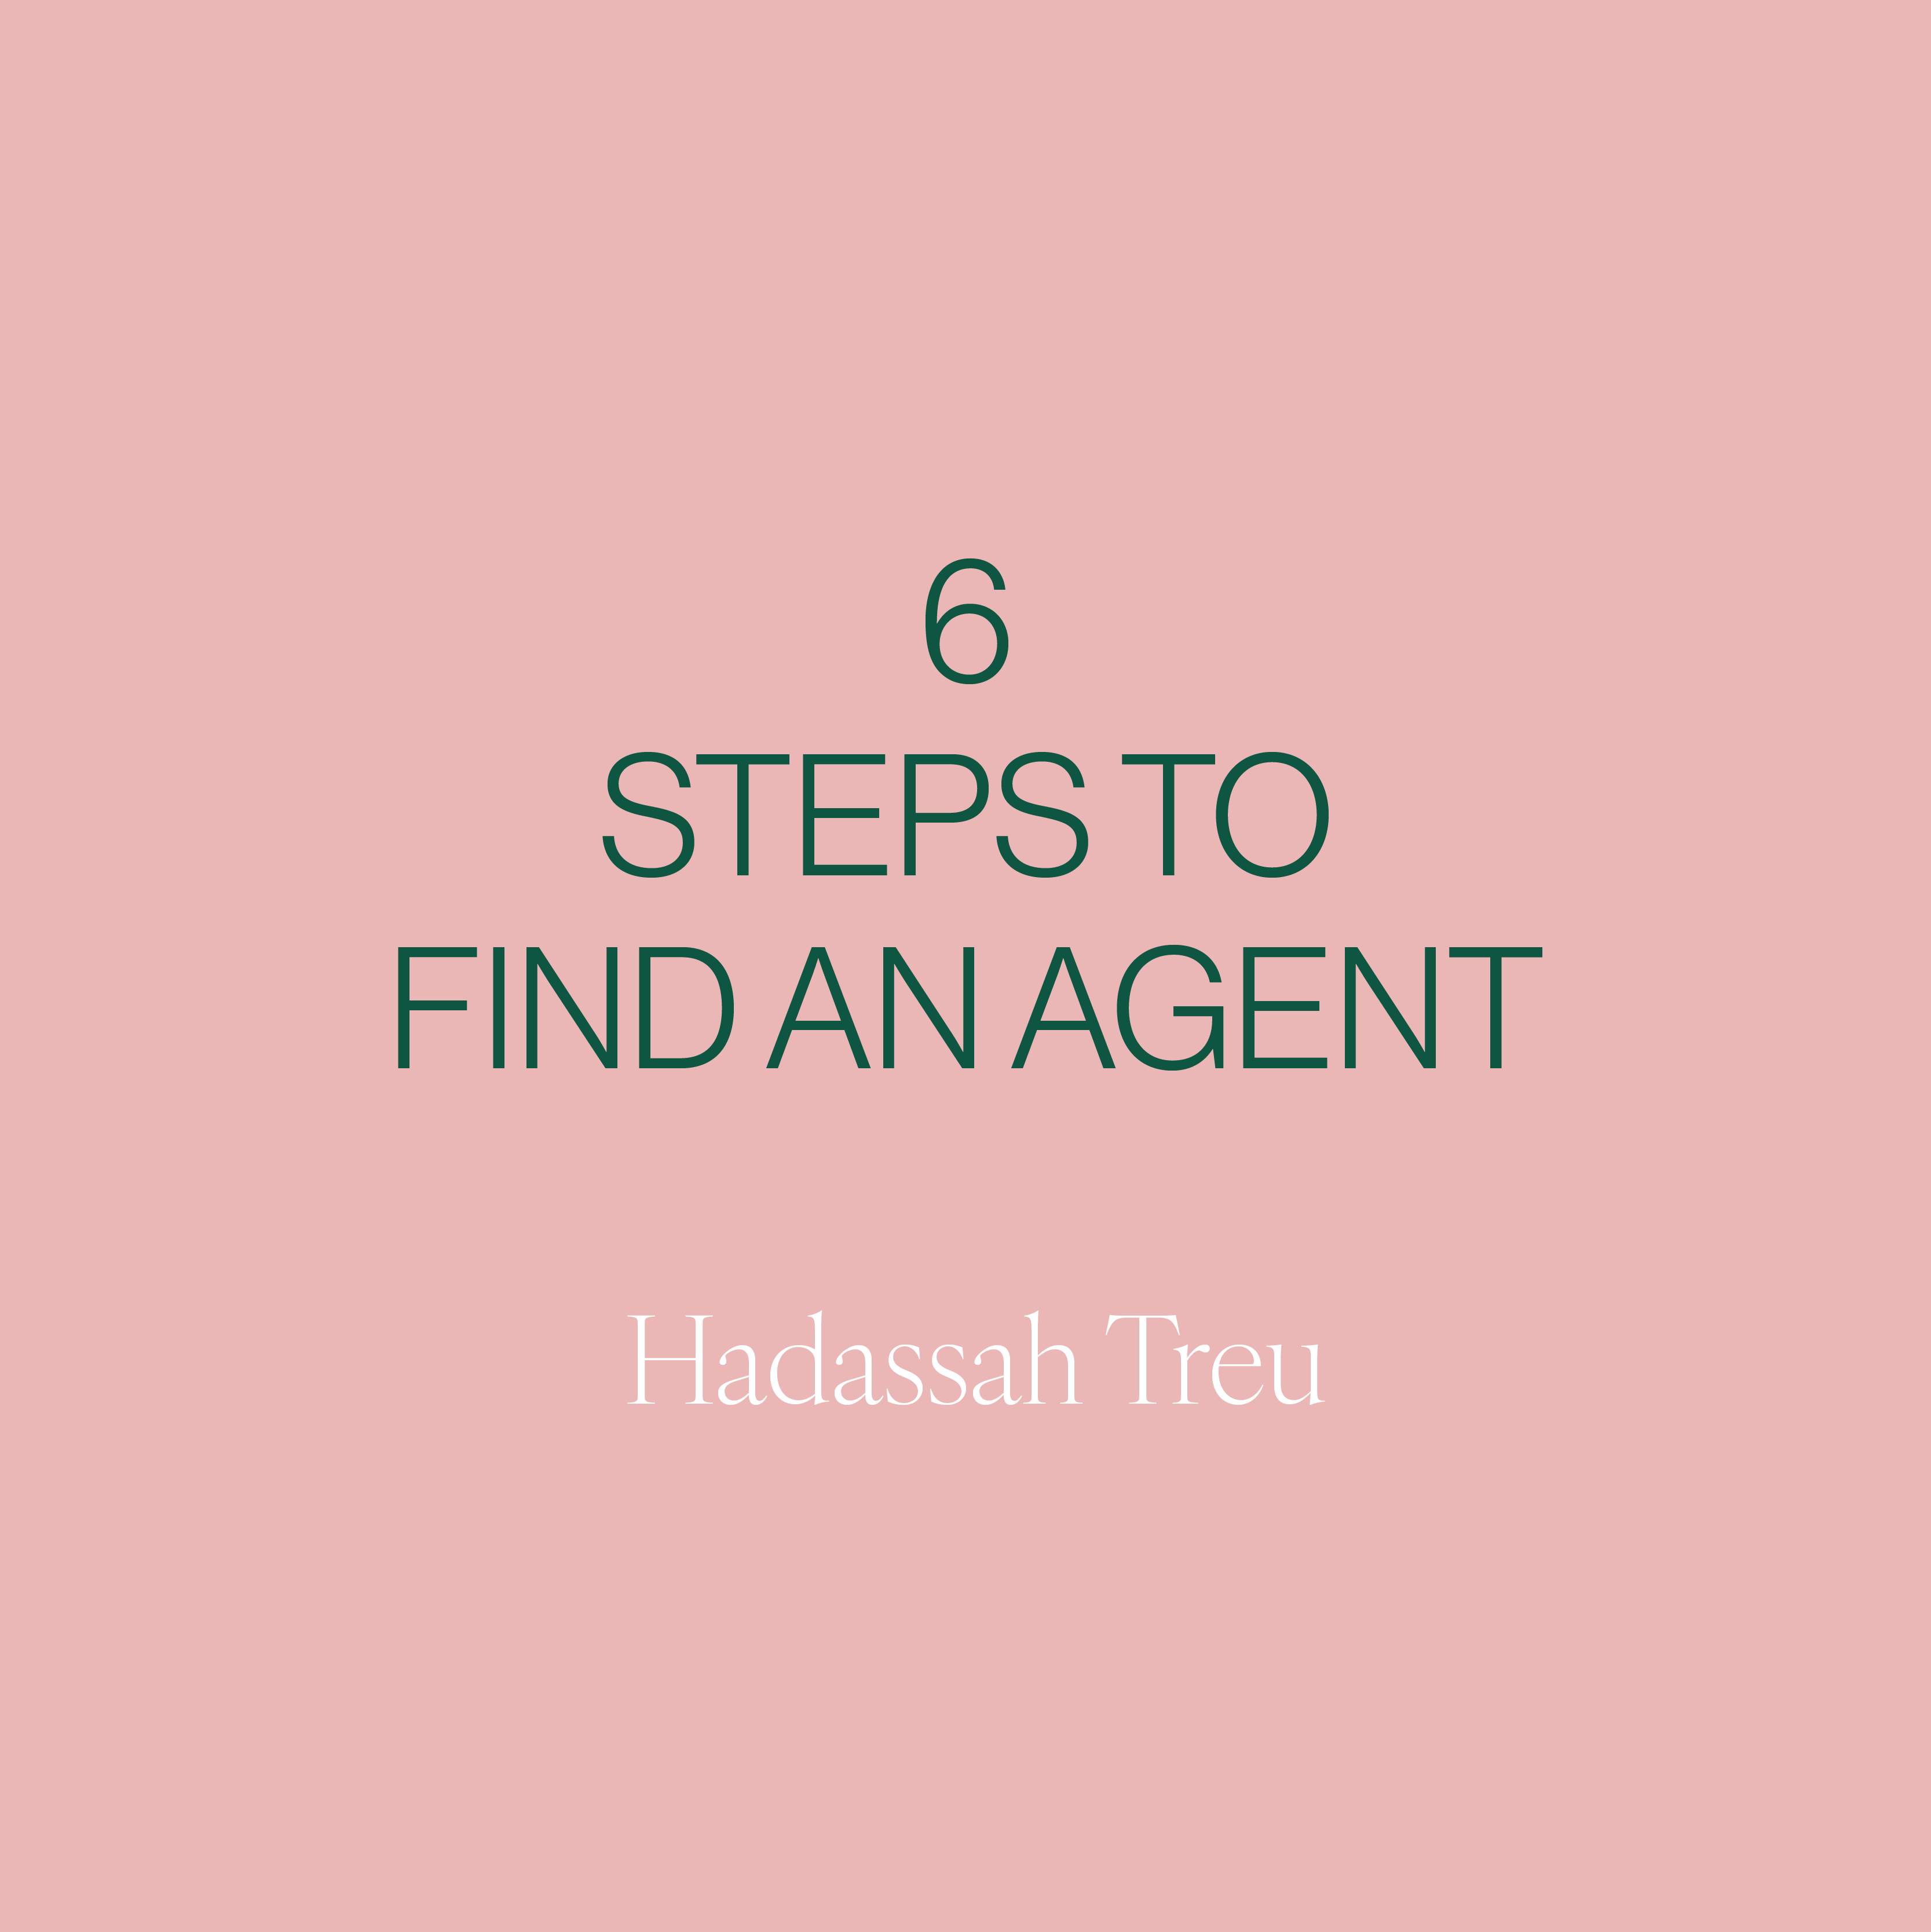 Finding and securing an agent can be an overwhelming task. However, with these six steps, you will be more prepared to find the perfect fit for your writing dreams today.